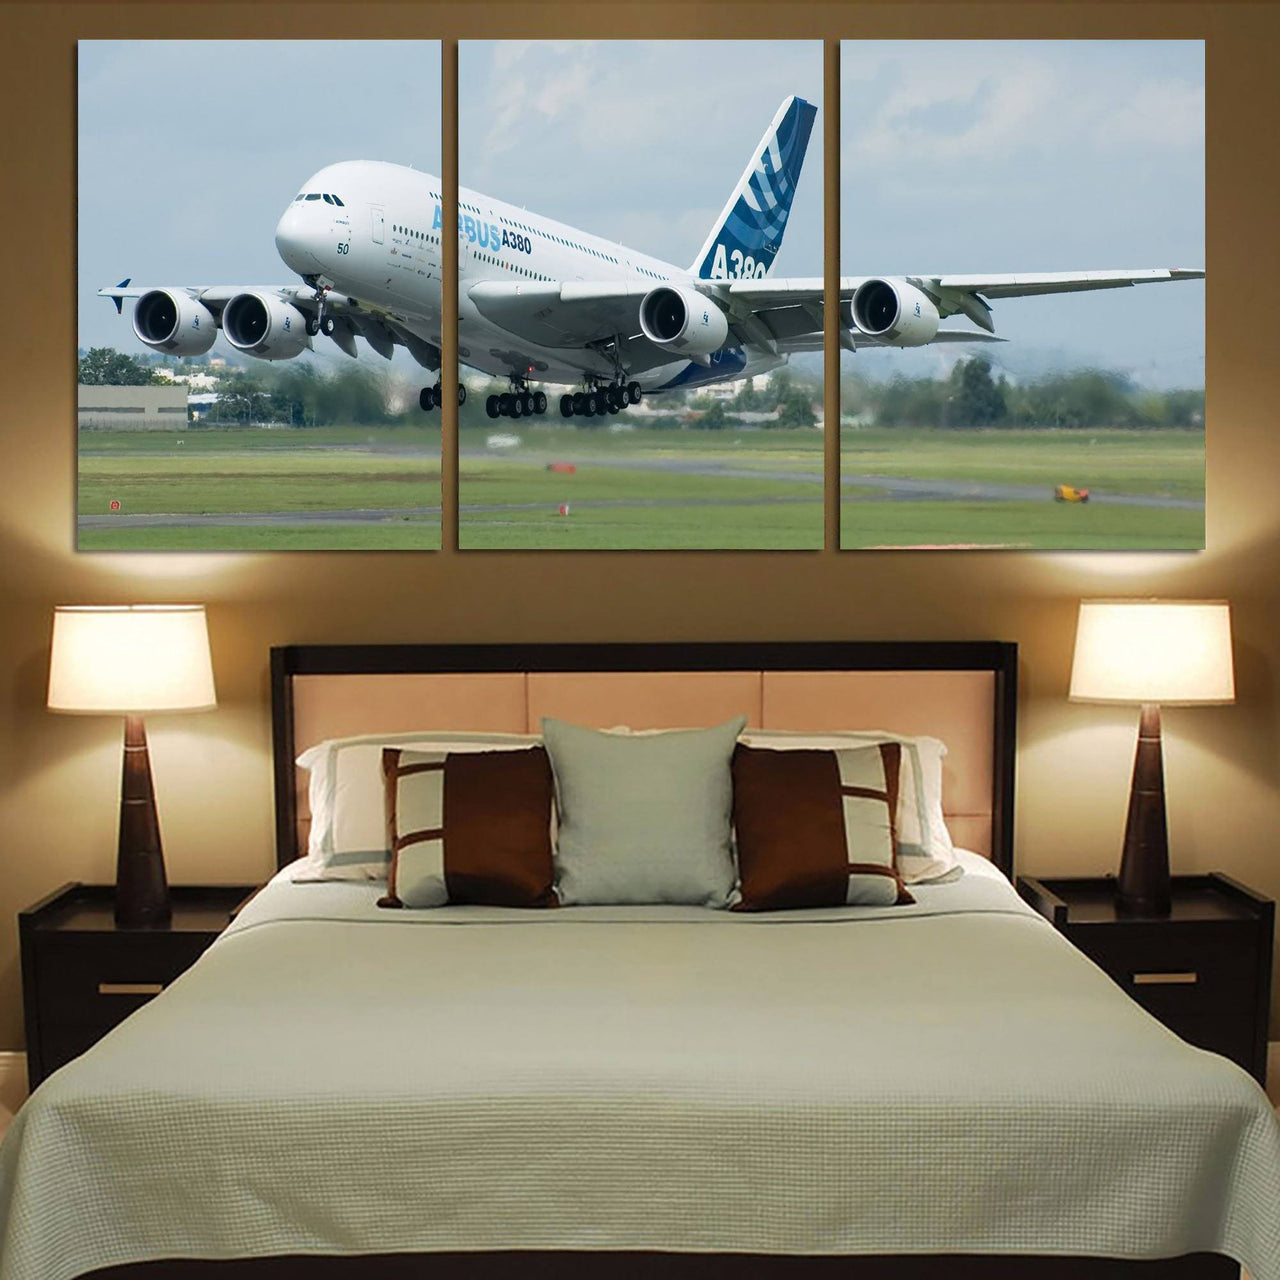 Departing Airbus A380 with Original Livery Printed Canvas Posters (3 Pieces) Aviation Shop 